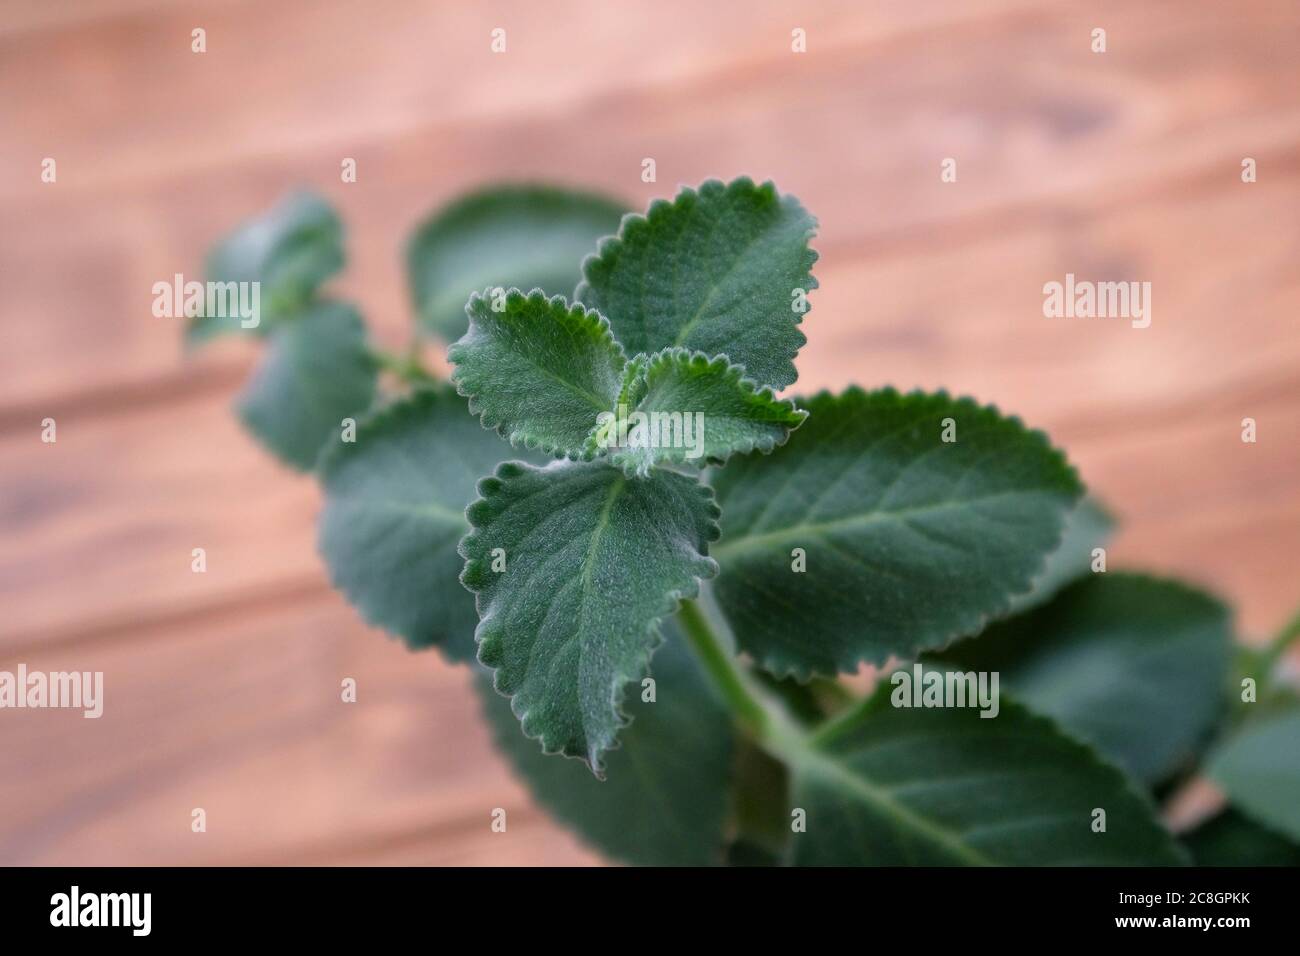 Green leaves of room mint. Close up, blurred background. Stock Photo